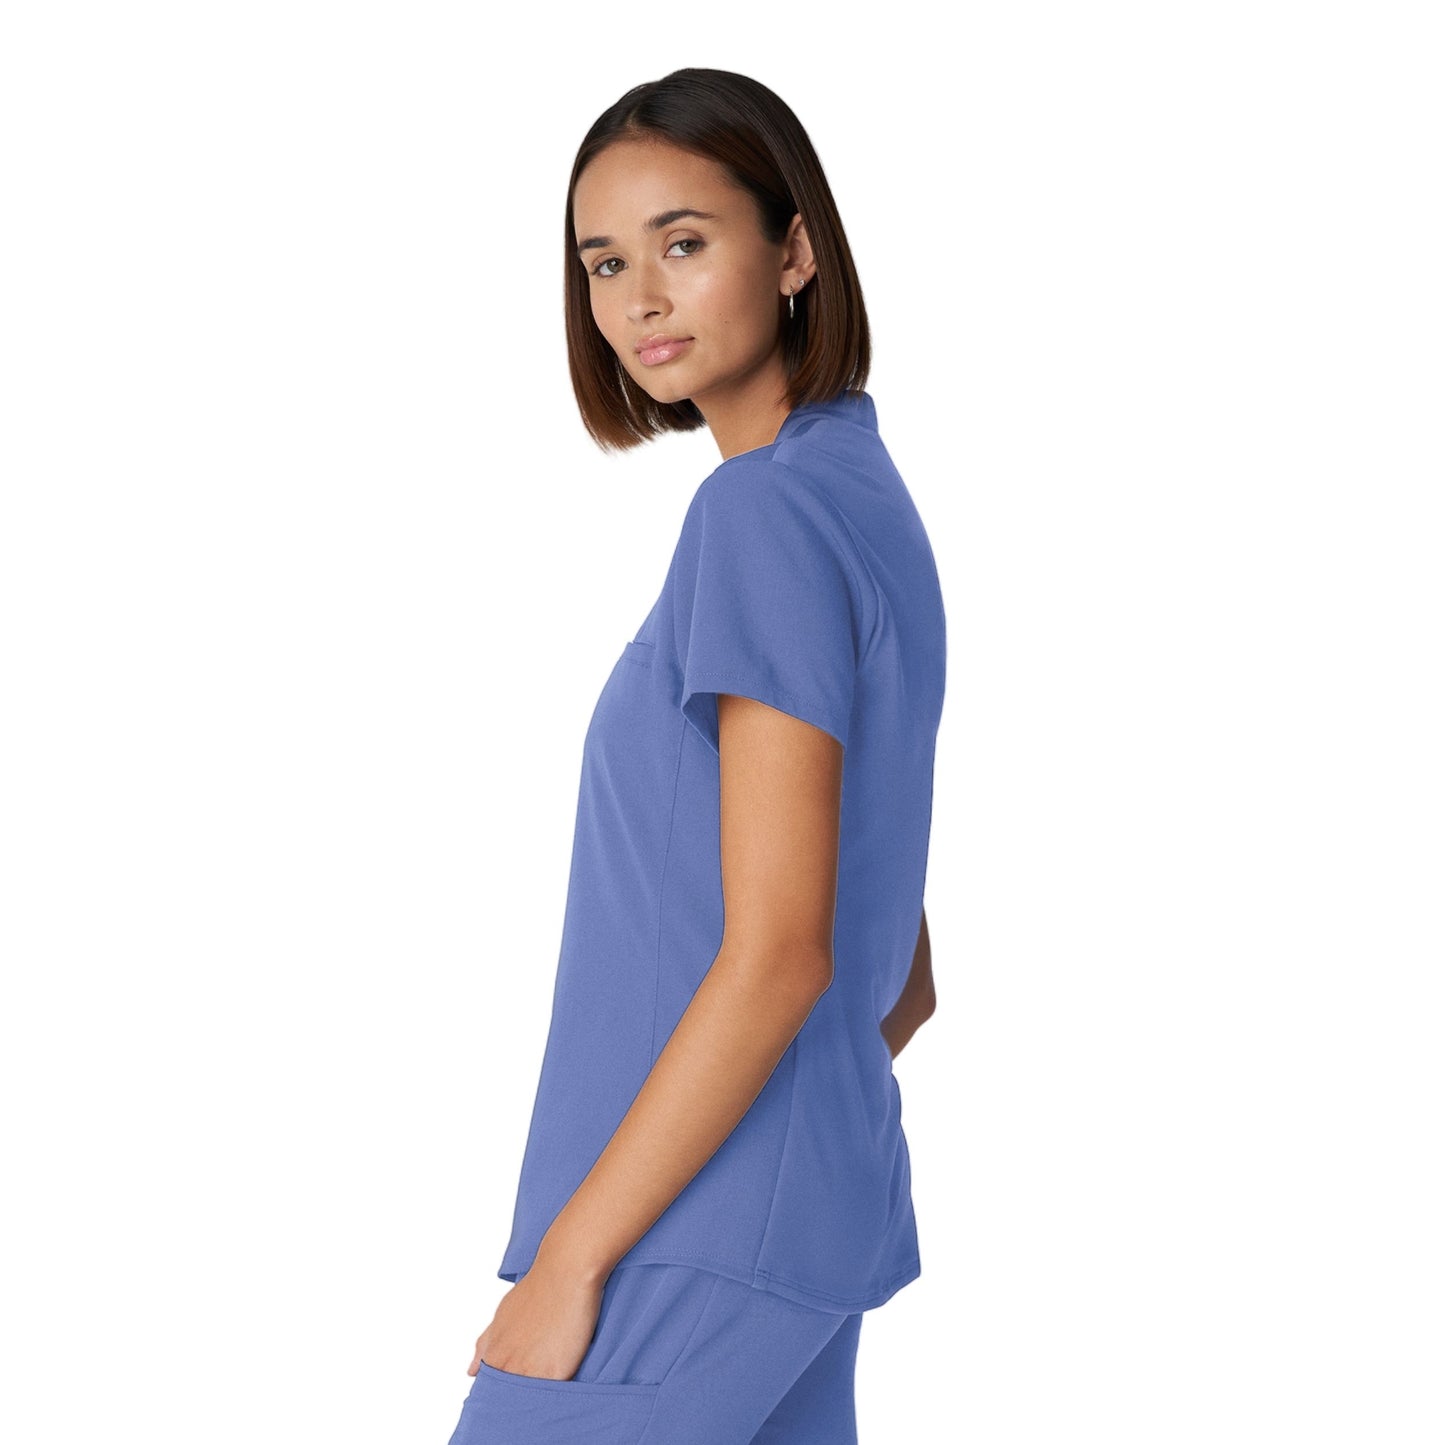 Women's top with two pockets - V-TESS - WC 110H